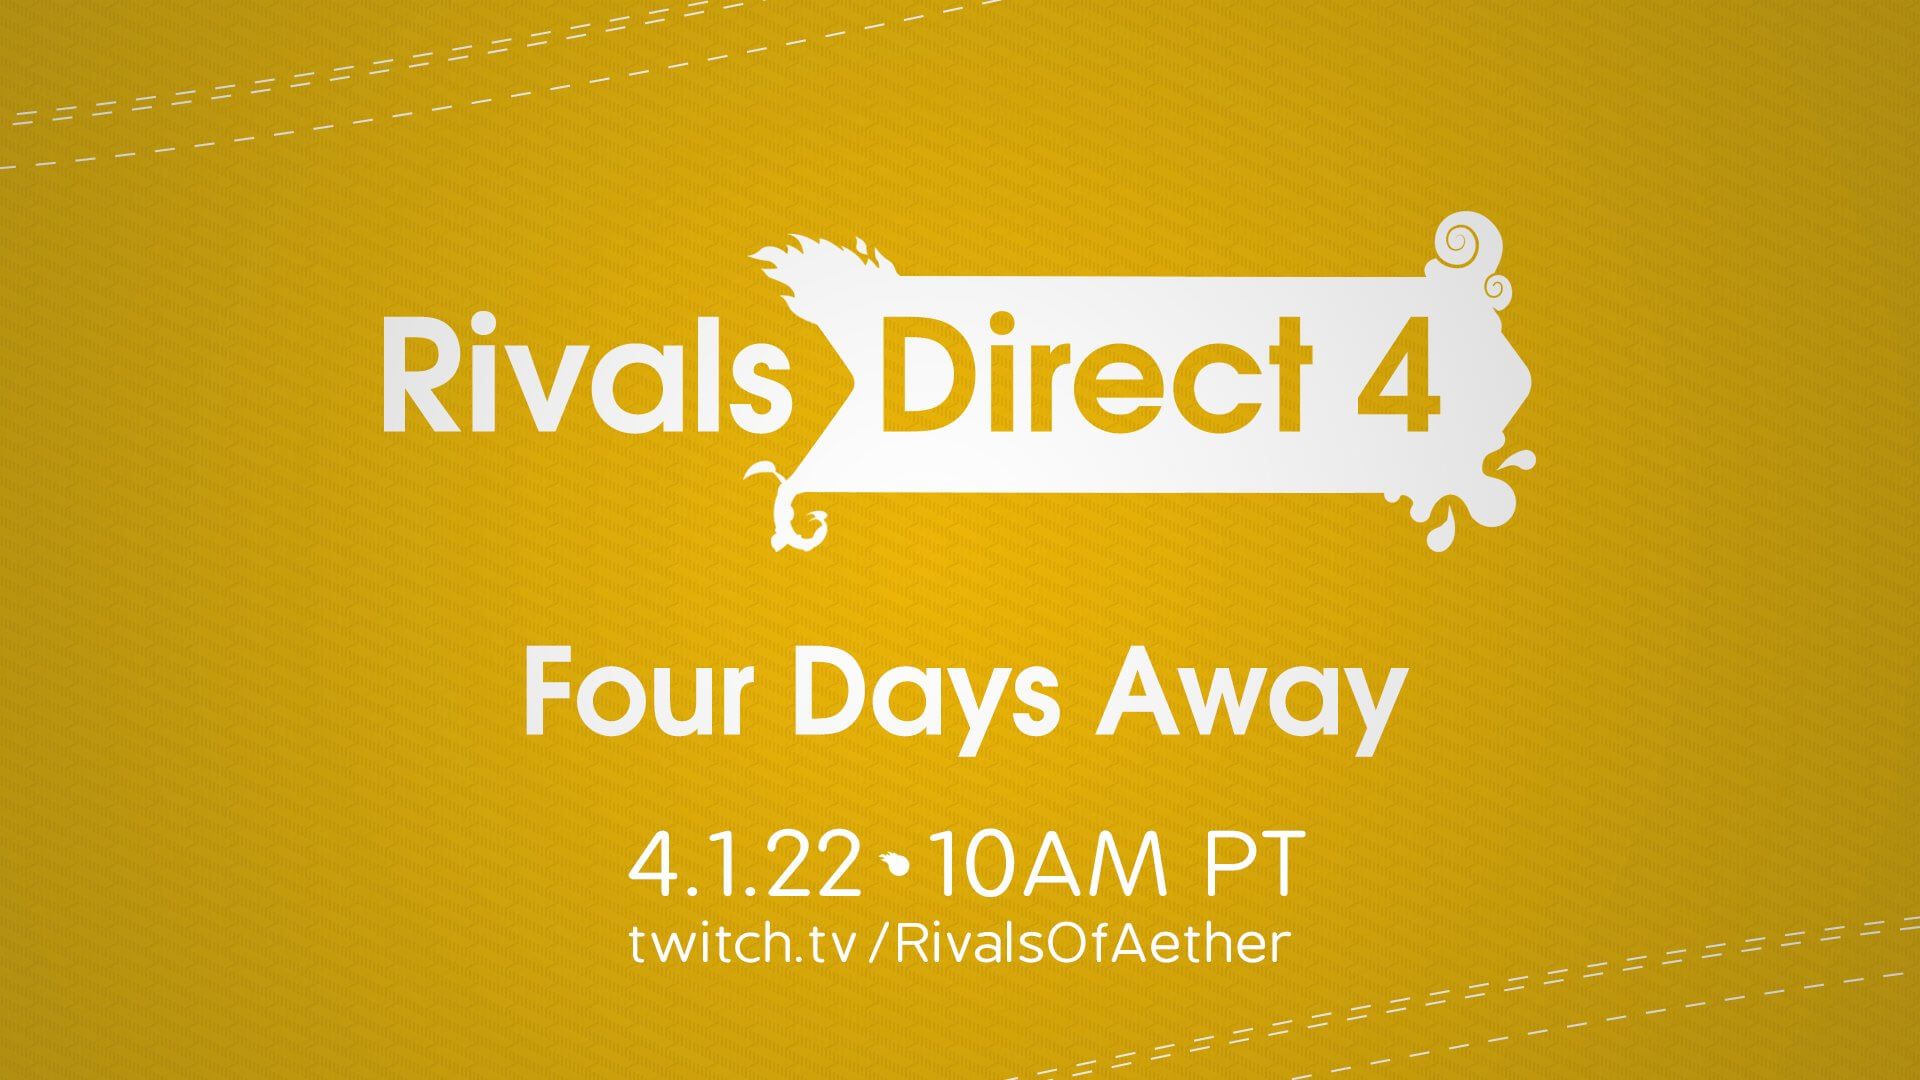 Rivals Direct 4 Is Right Around The Corner